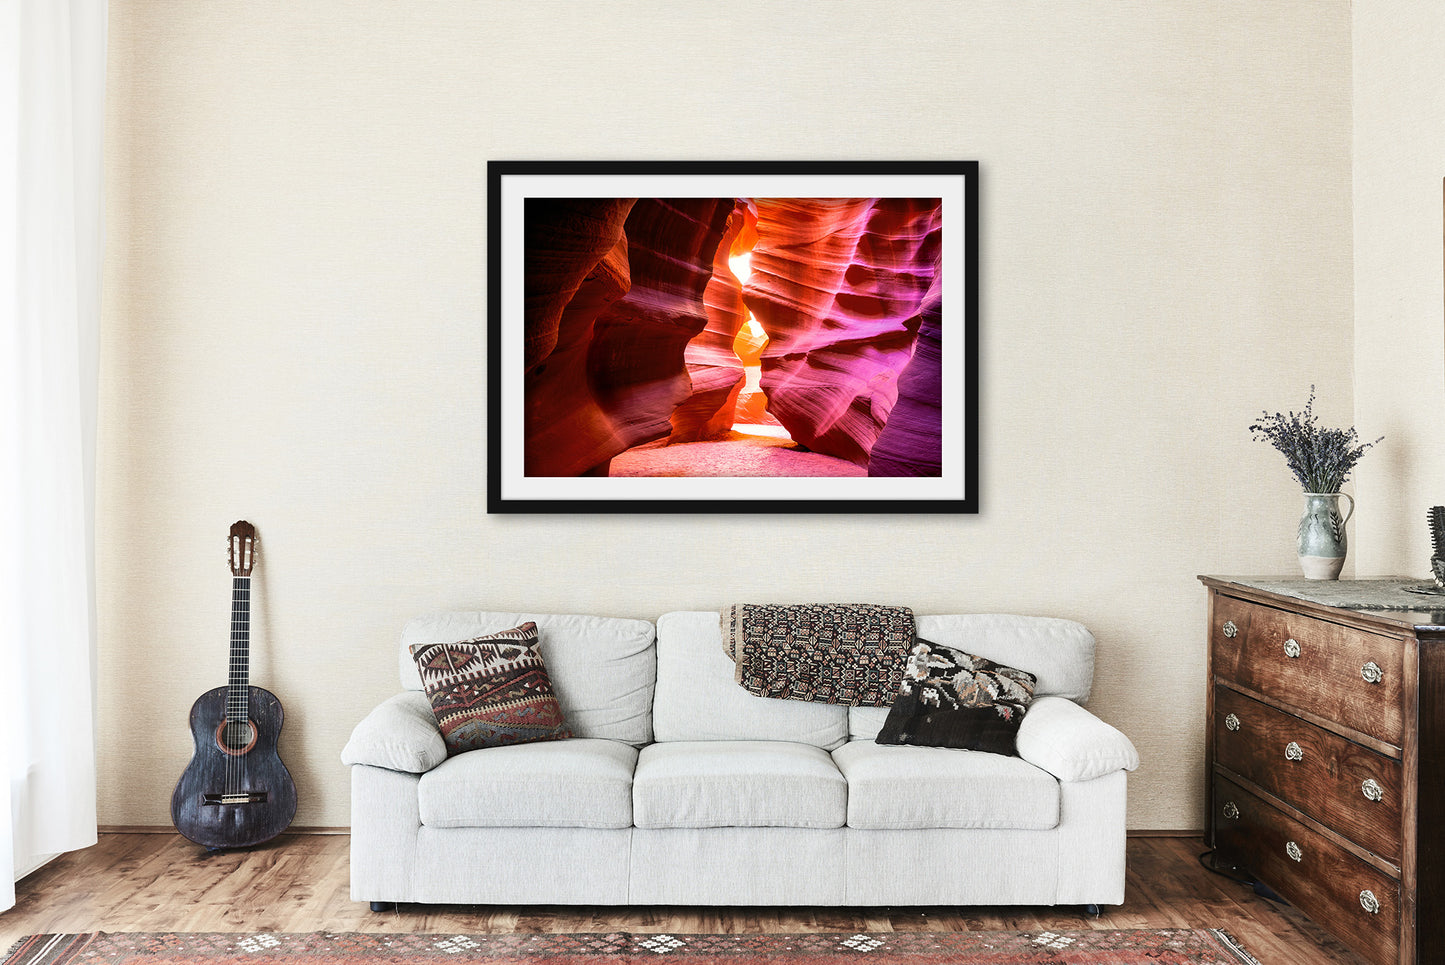 Framed Antelope Canyon Print (Ready to Hang) Picture of Slot Canyon Walls Shaped as Hourglass in Arizona Desert Wall Art Southwestern Decor